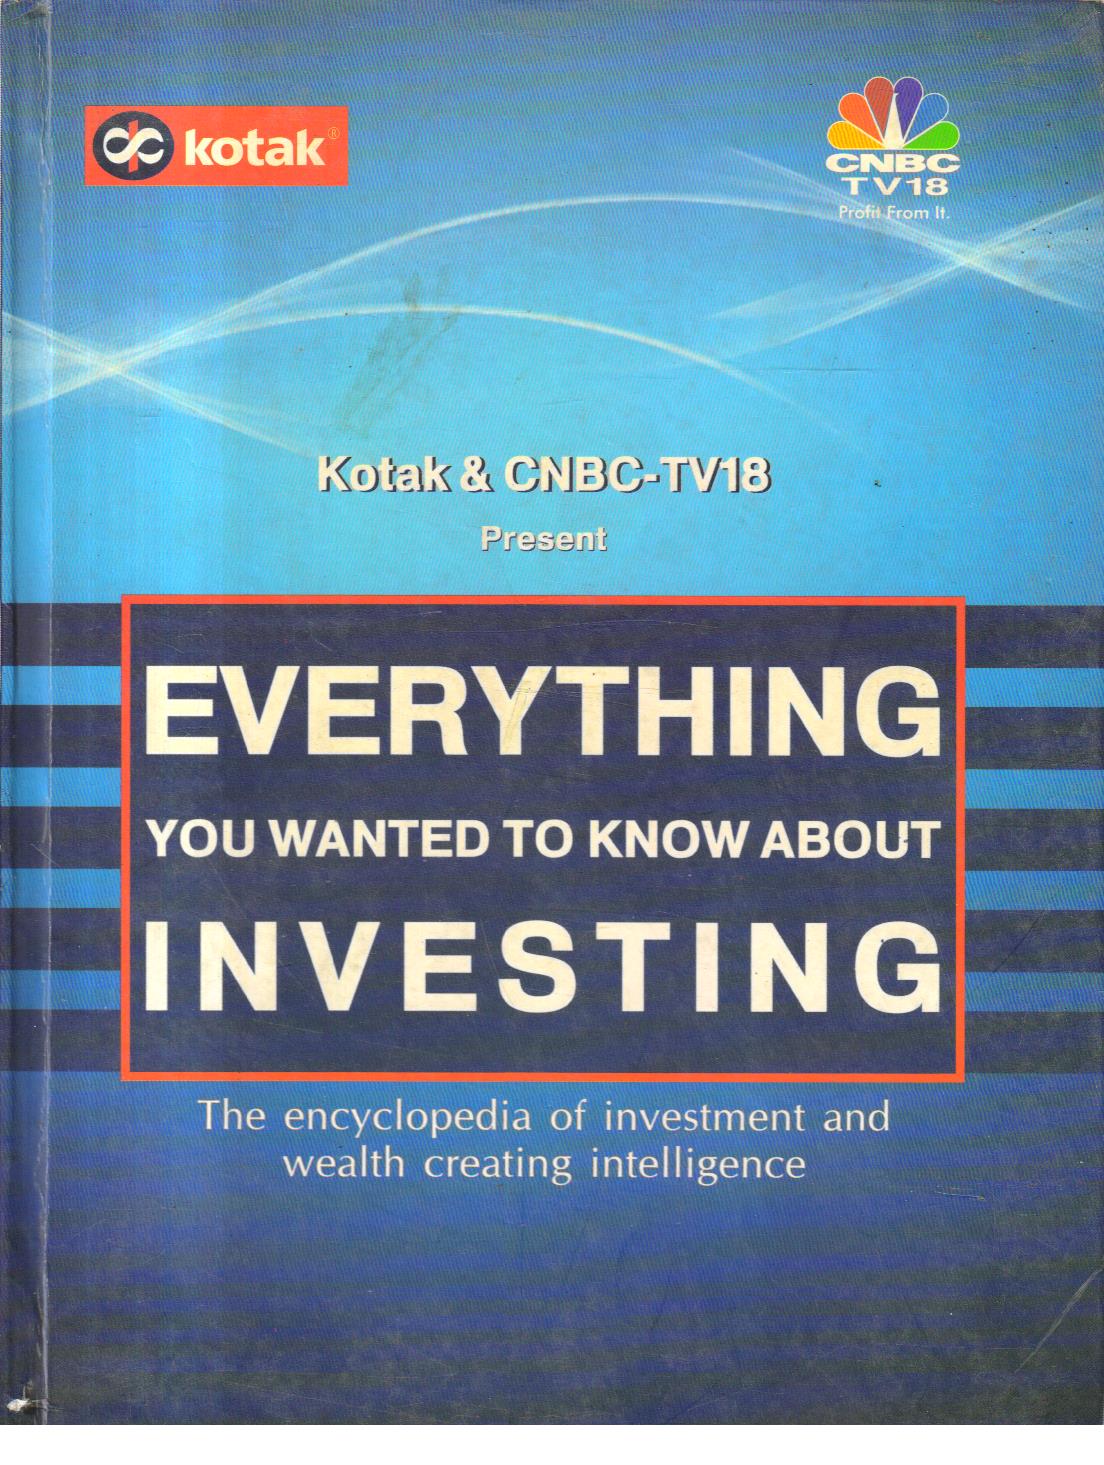 Everything you wanted to know about Investing